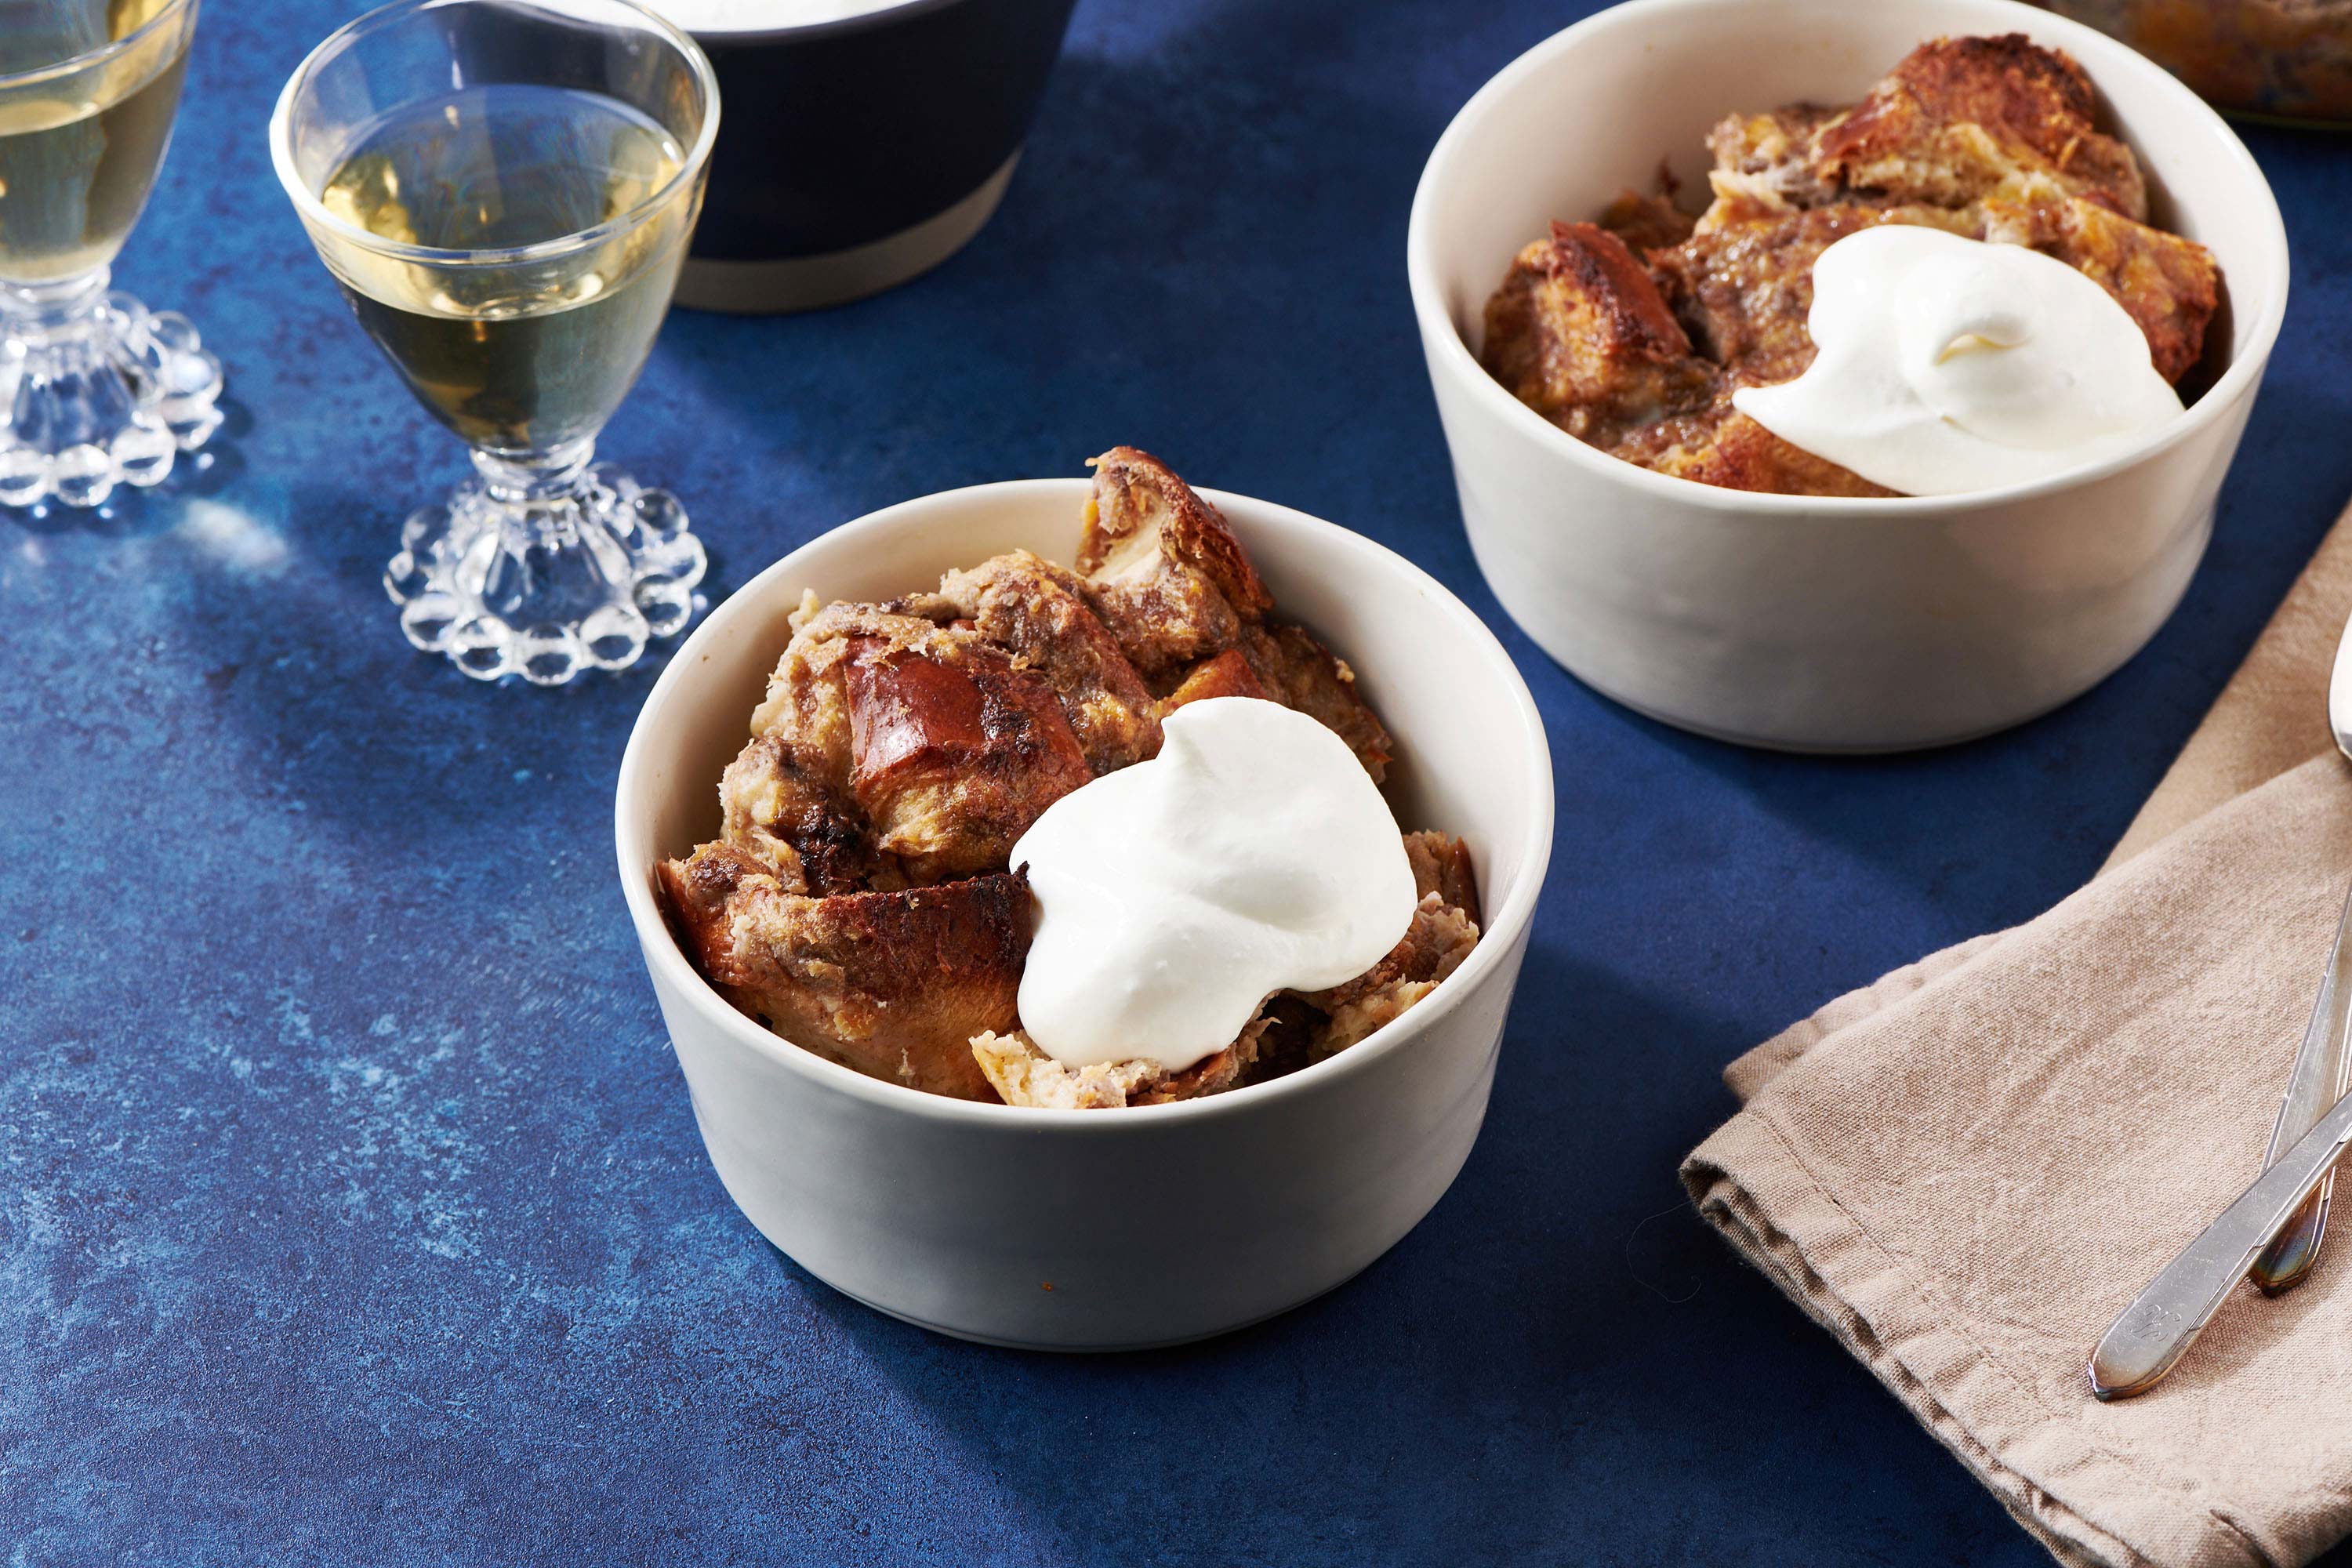 Two bowls of Banana Bread Pudding topped with whipped cream with small glasses of white wine.